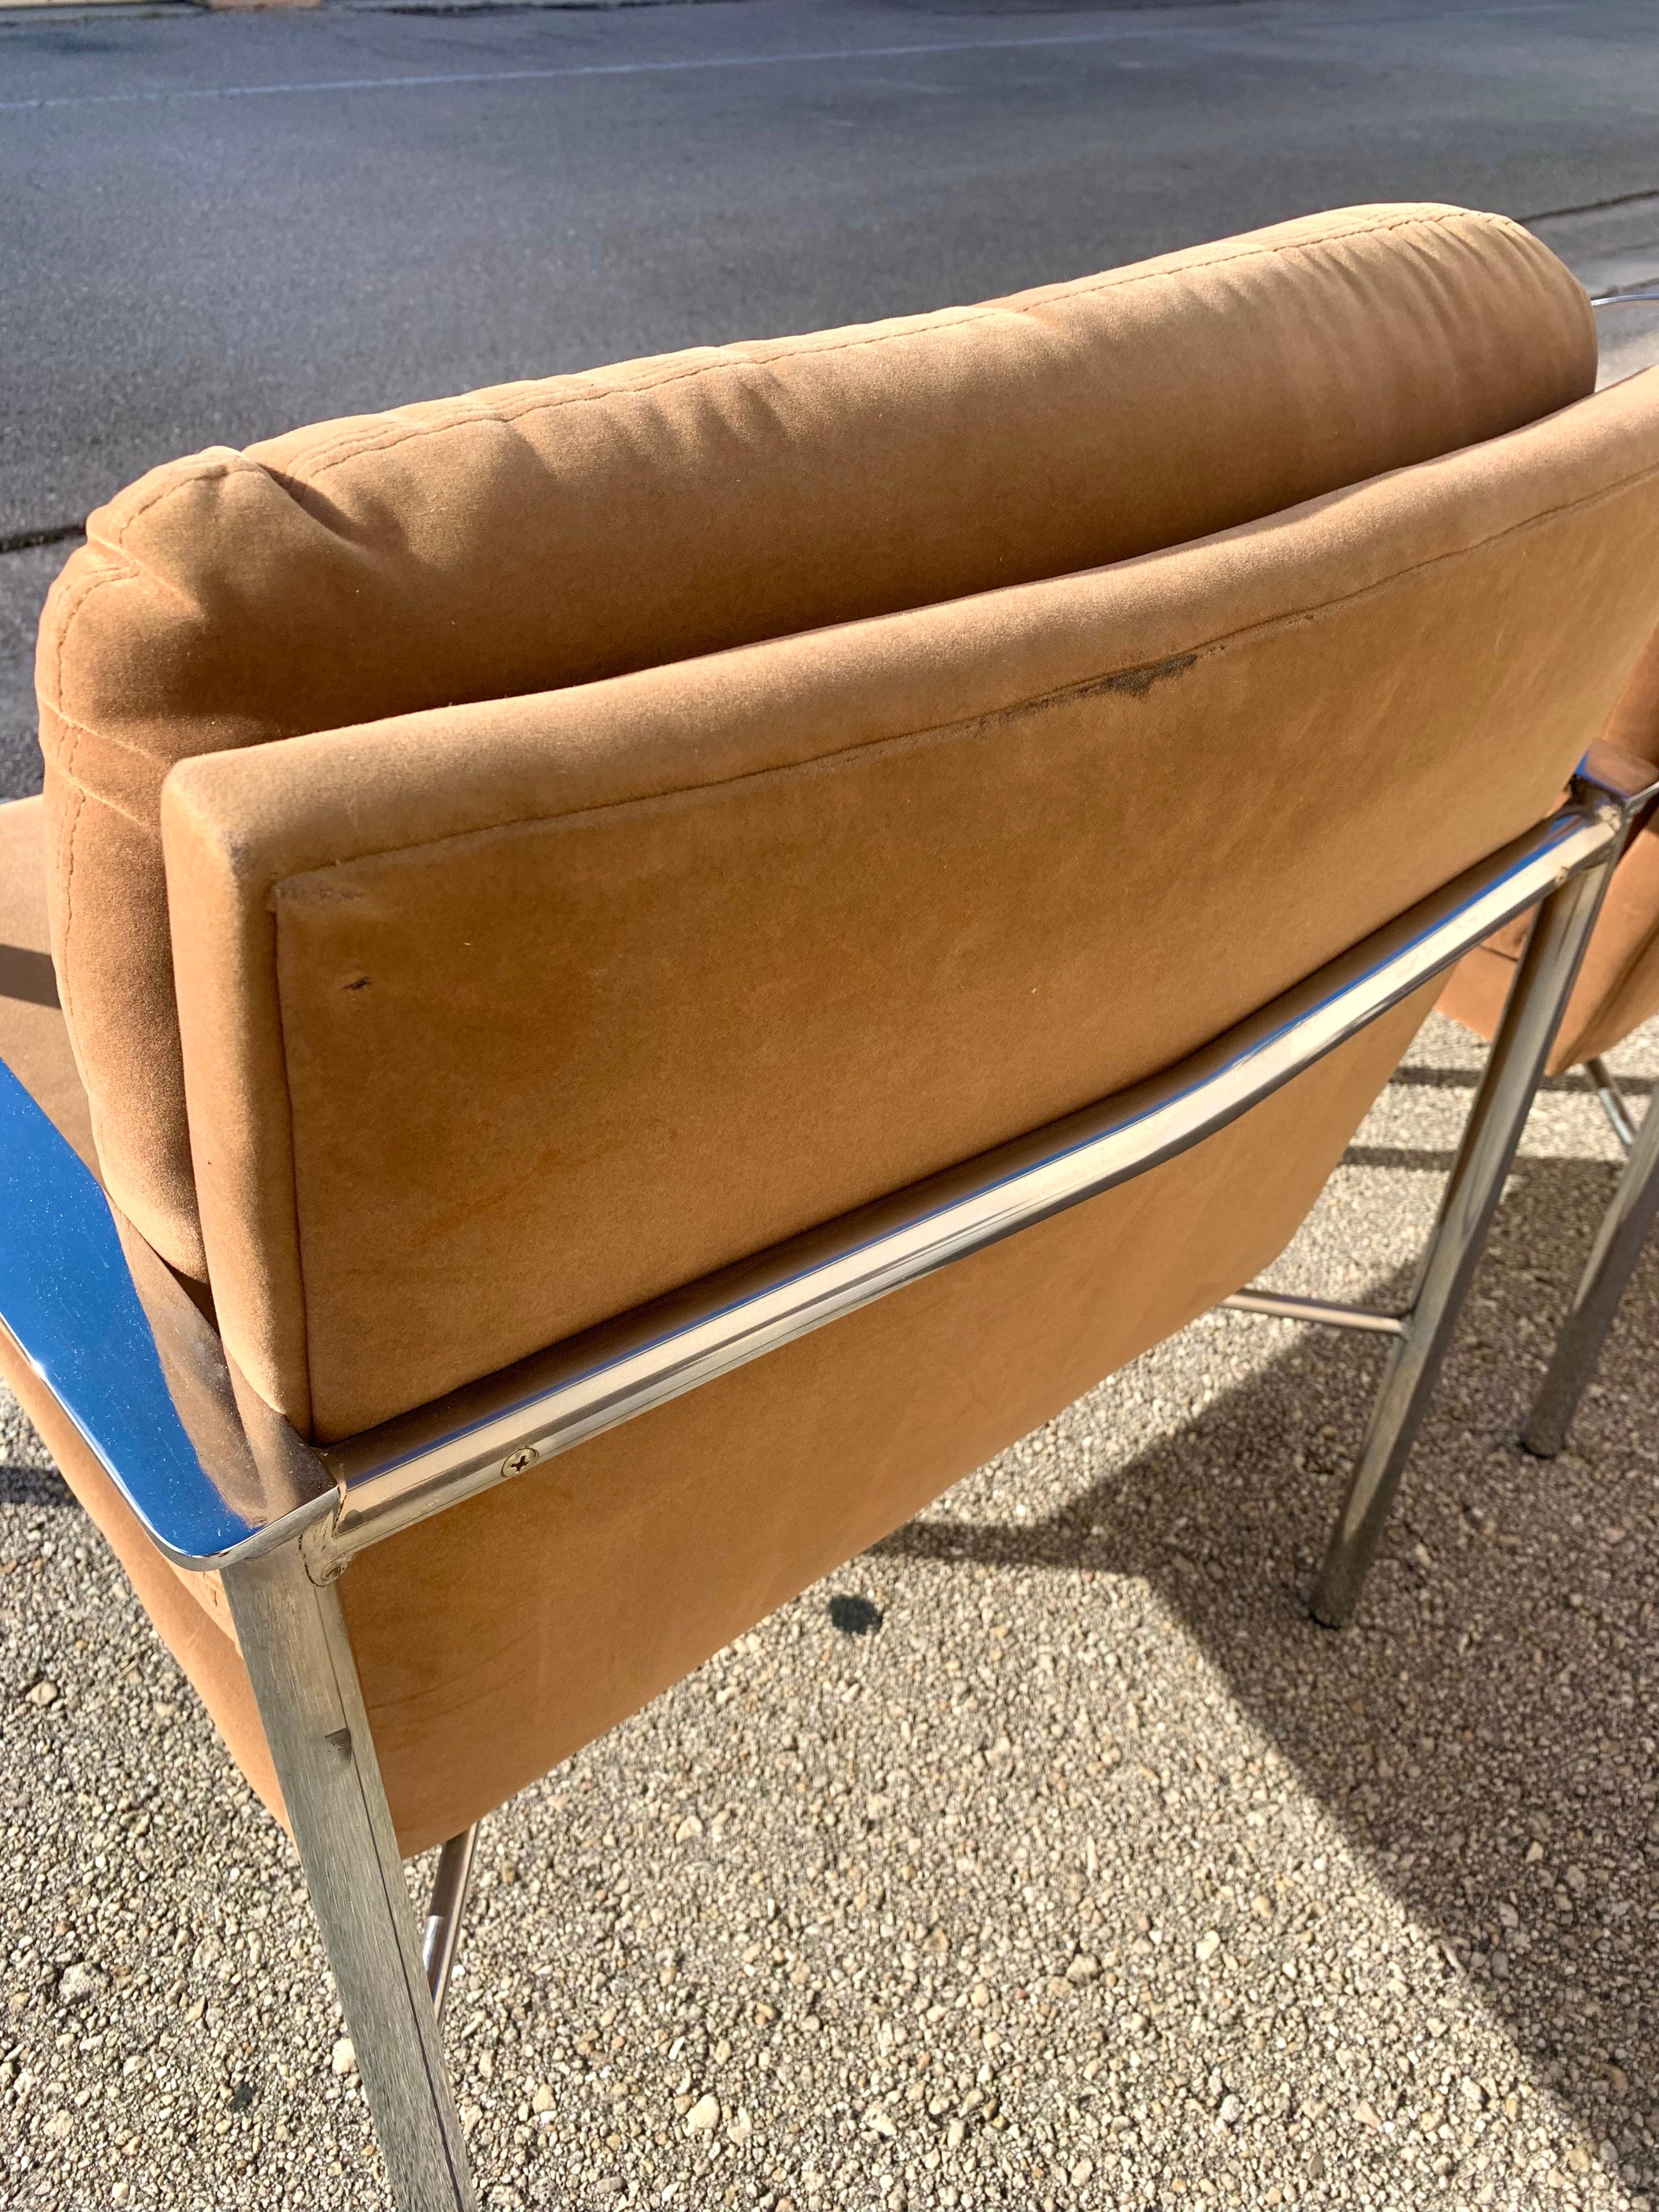 Upholstery 1980s Milo Baughman Style Mid-Century Modern Flat Bar Chrome Lounge Chairs For Sale